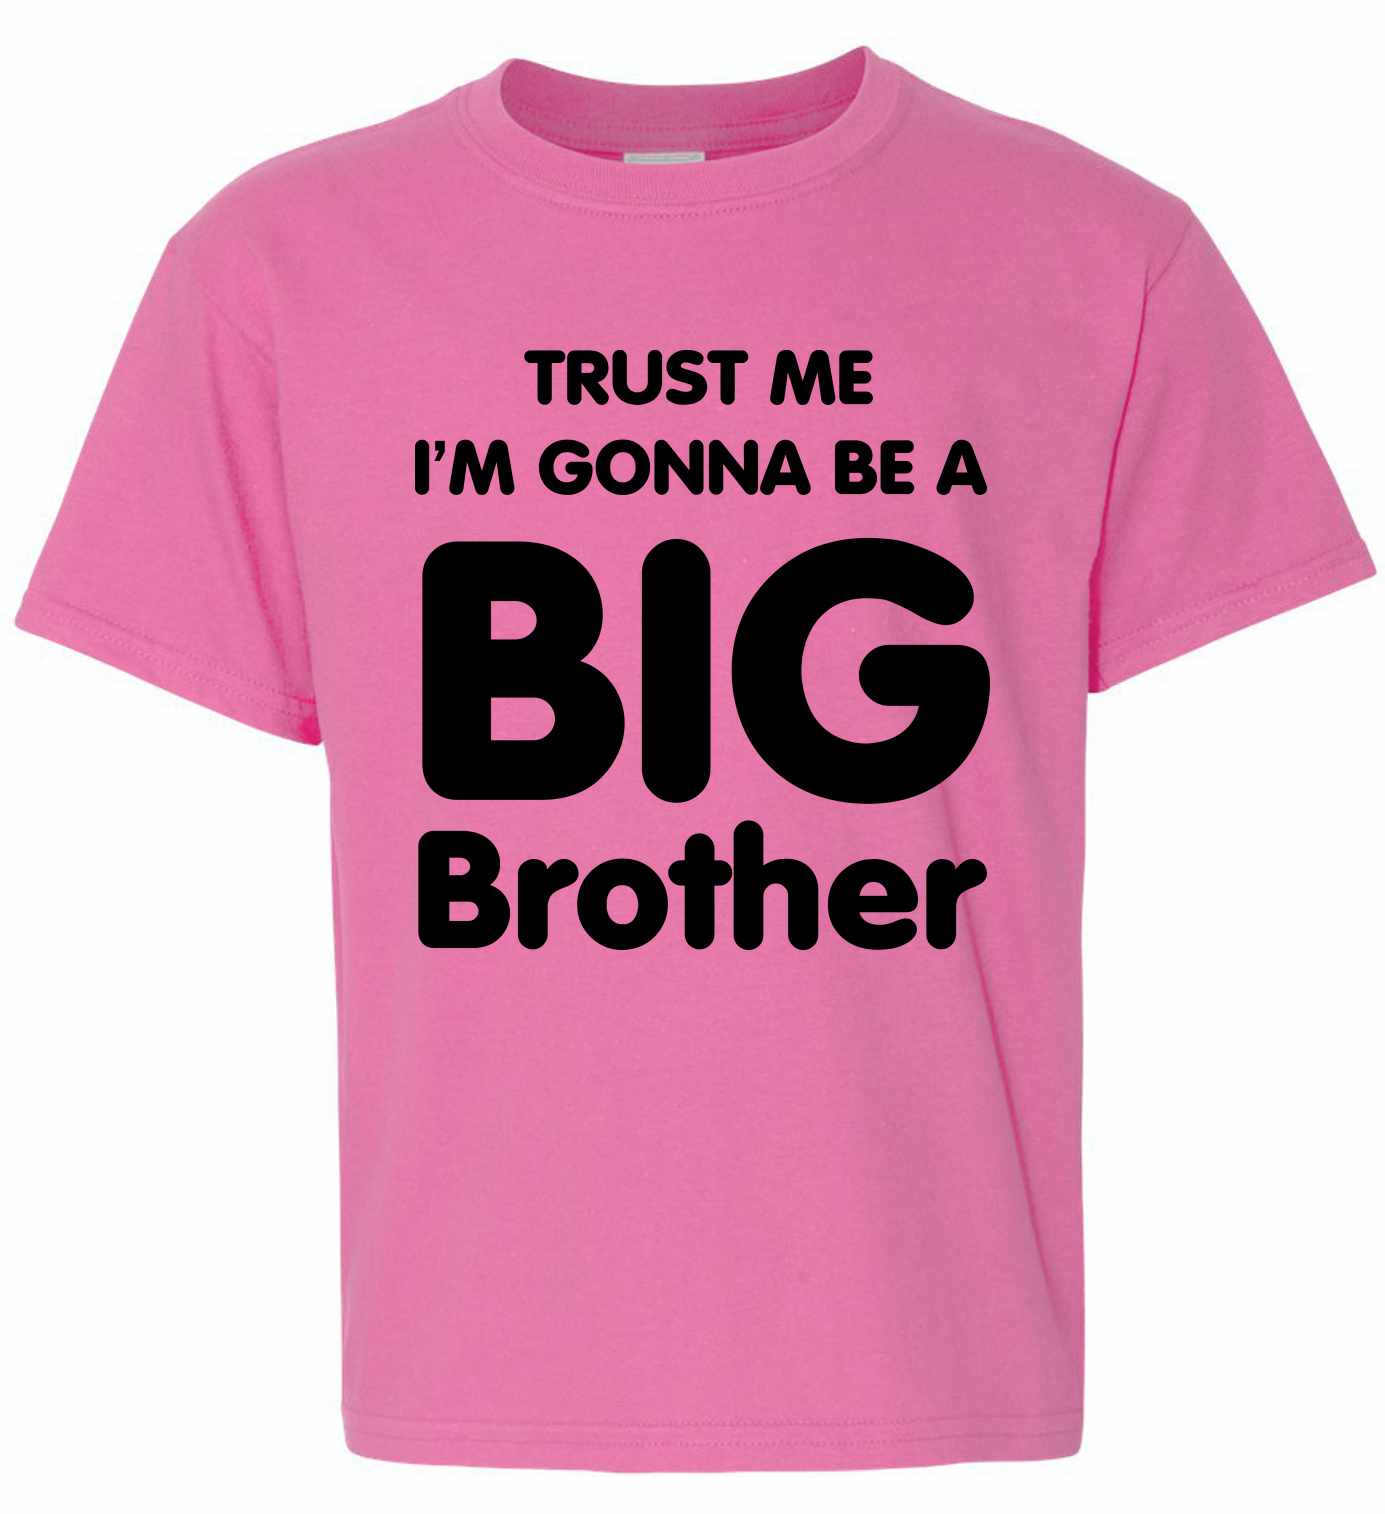 Trust Me I'm Gonna be a Big Brother on Kids T-Shirt (#810-201)